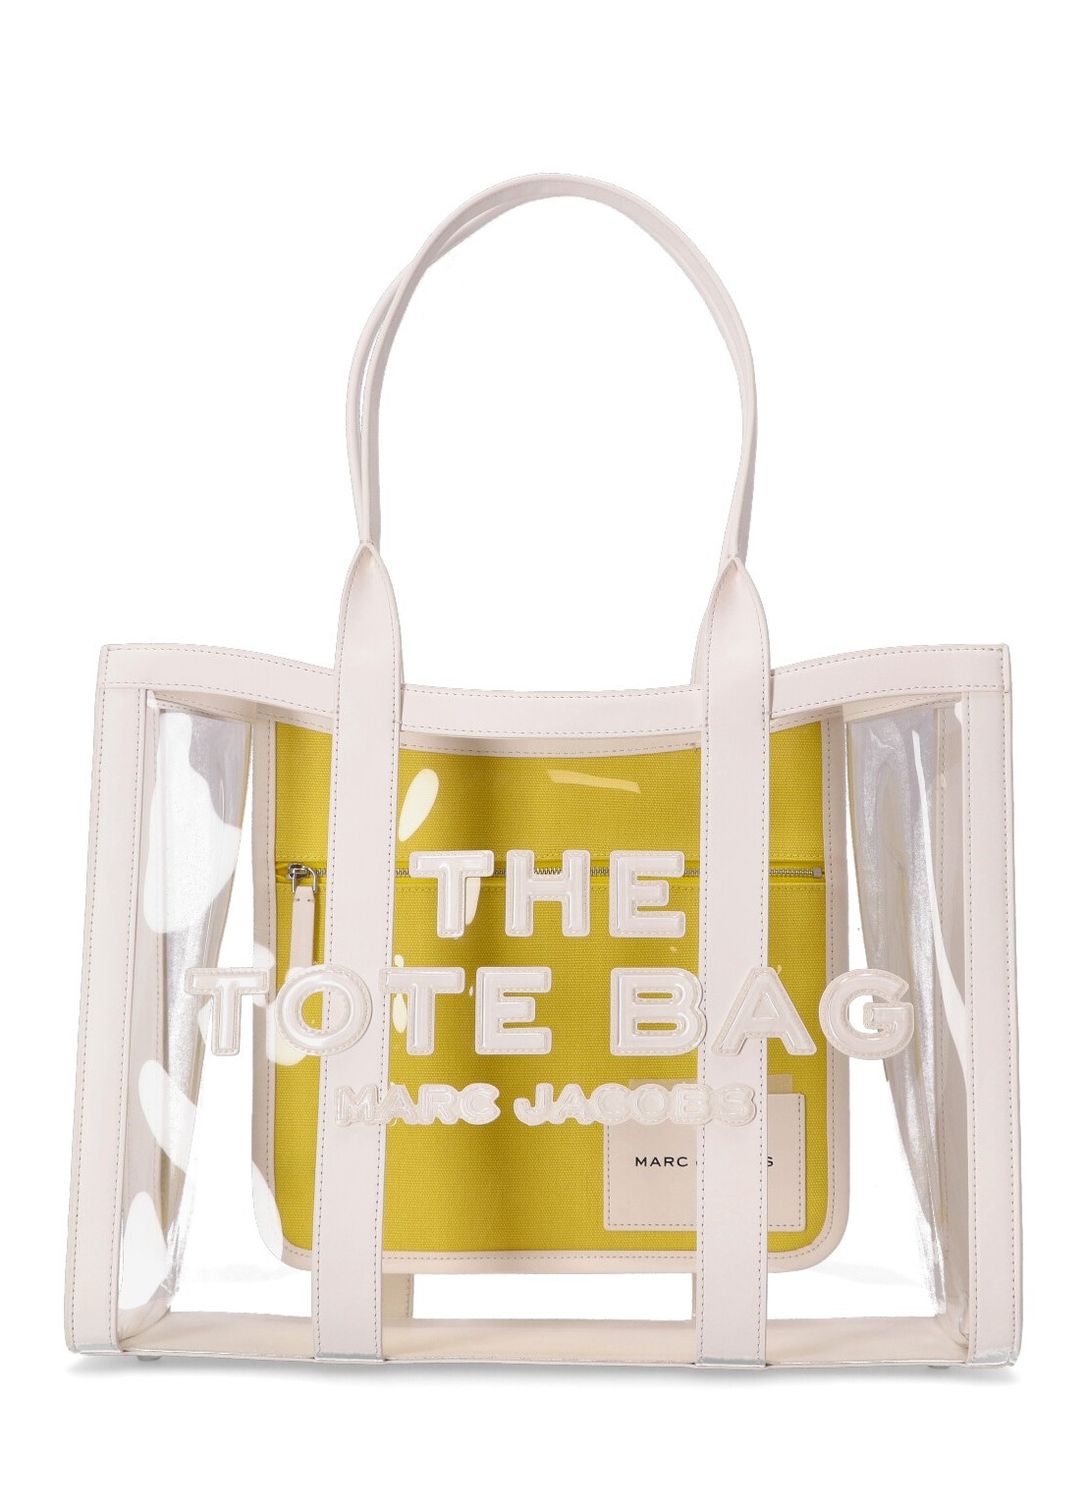 MARC JACOBS The Clear Large White PVC Tote Bag for Women